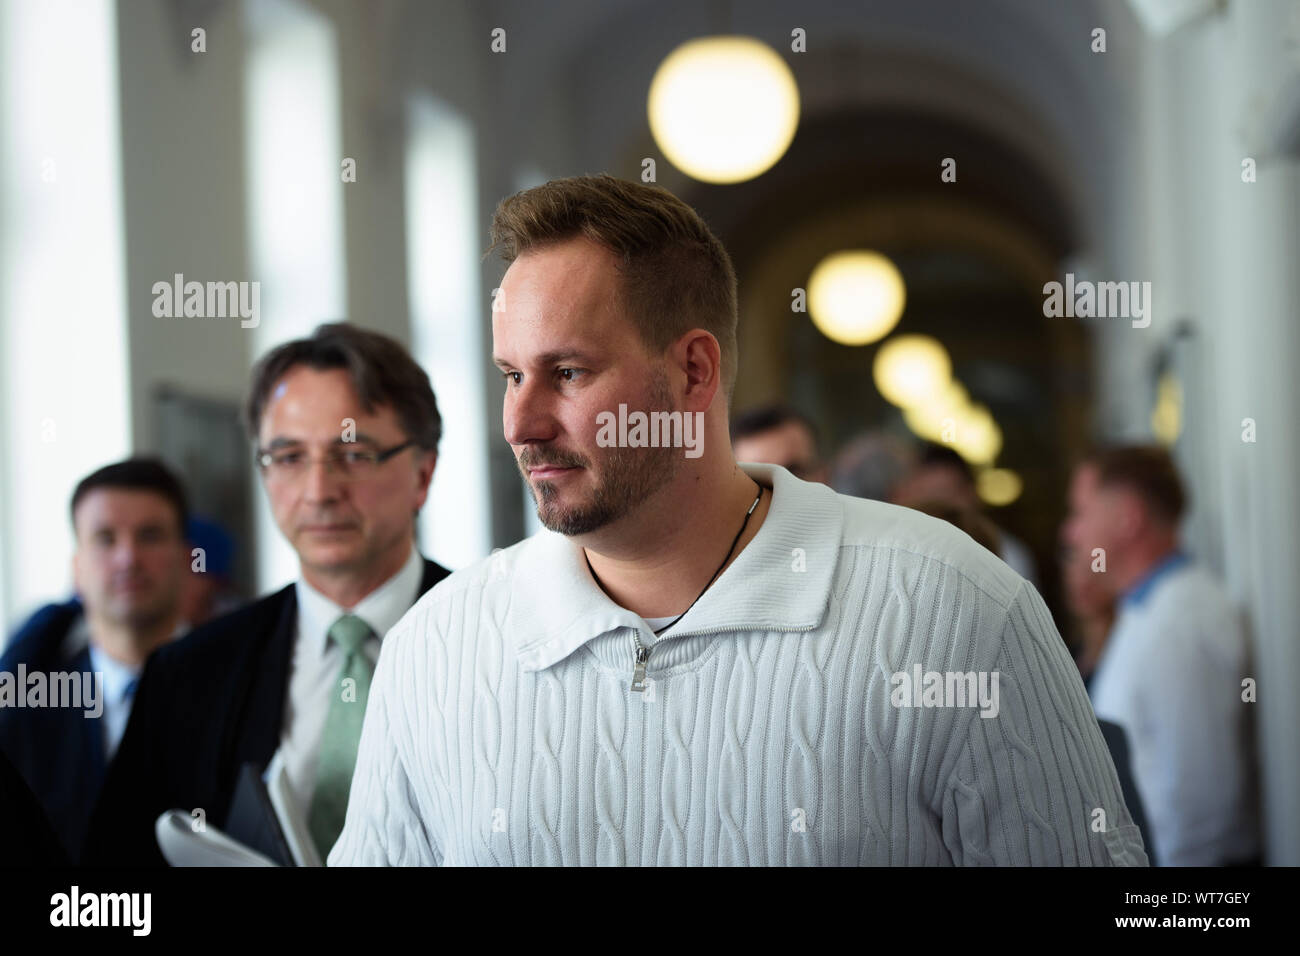 Berlin, Germany. 11th Sep, 2019. Jens Redlich, former chairman of the board  of the soccer club Tennis Borussia Berlin, leaves a hall in the district  court Charlottenburg after a hearing in the